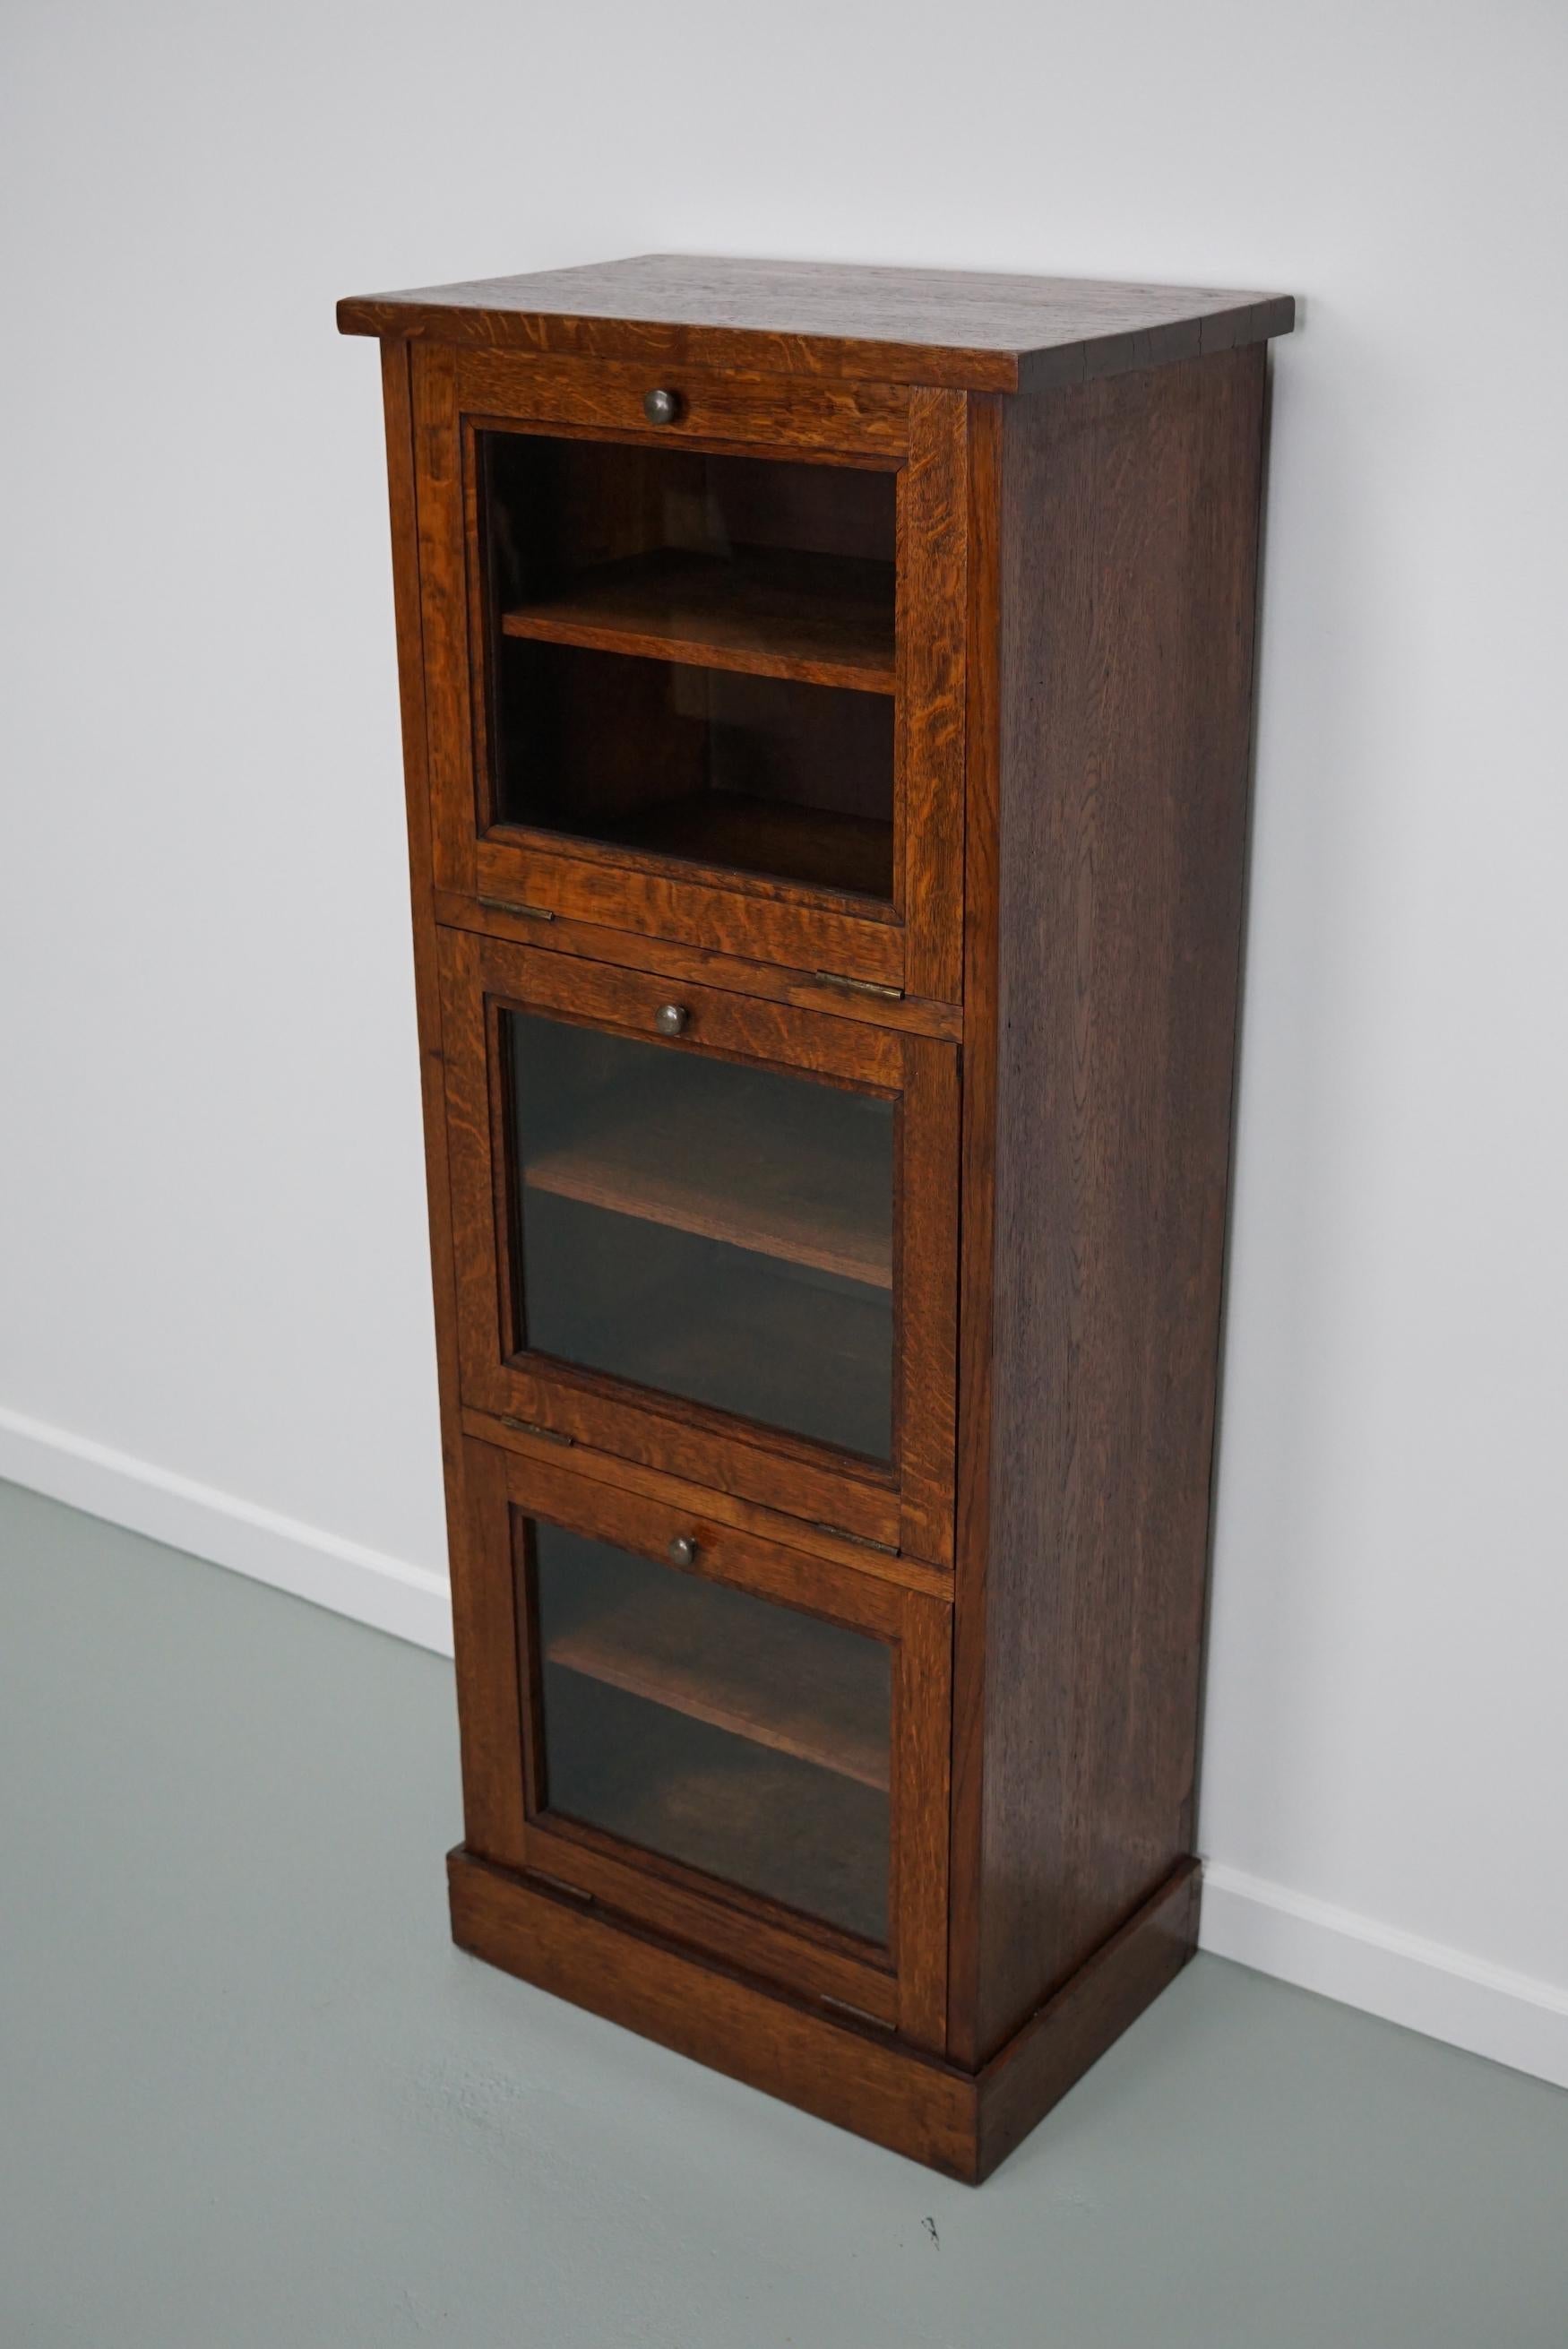 This haberdashery cabinet was produced during the 1930s in France. This piece features 3 folding doors in oak with glass fronts and brass knobs. It was originally used in a luxury warehouse in Paris. The interior dimensions of the 6 compartments